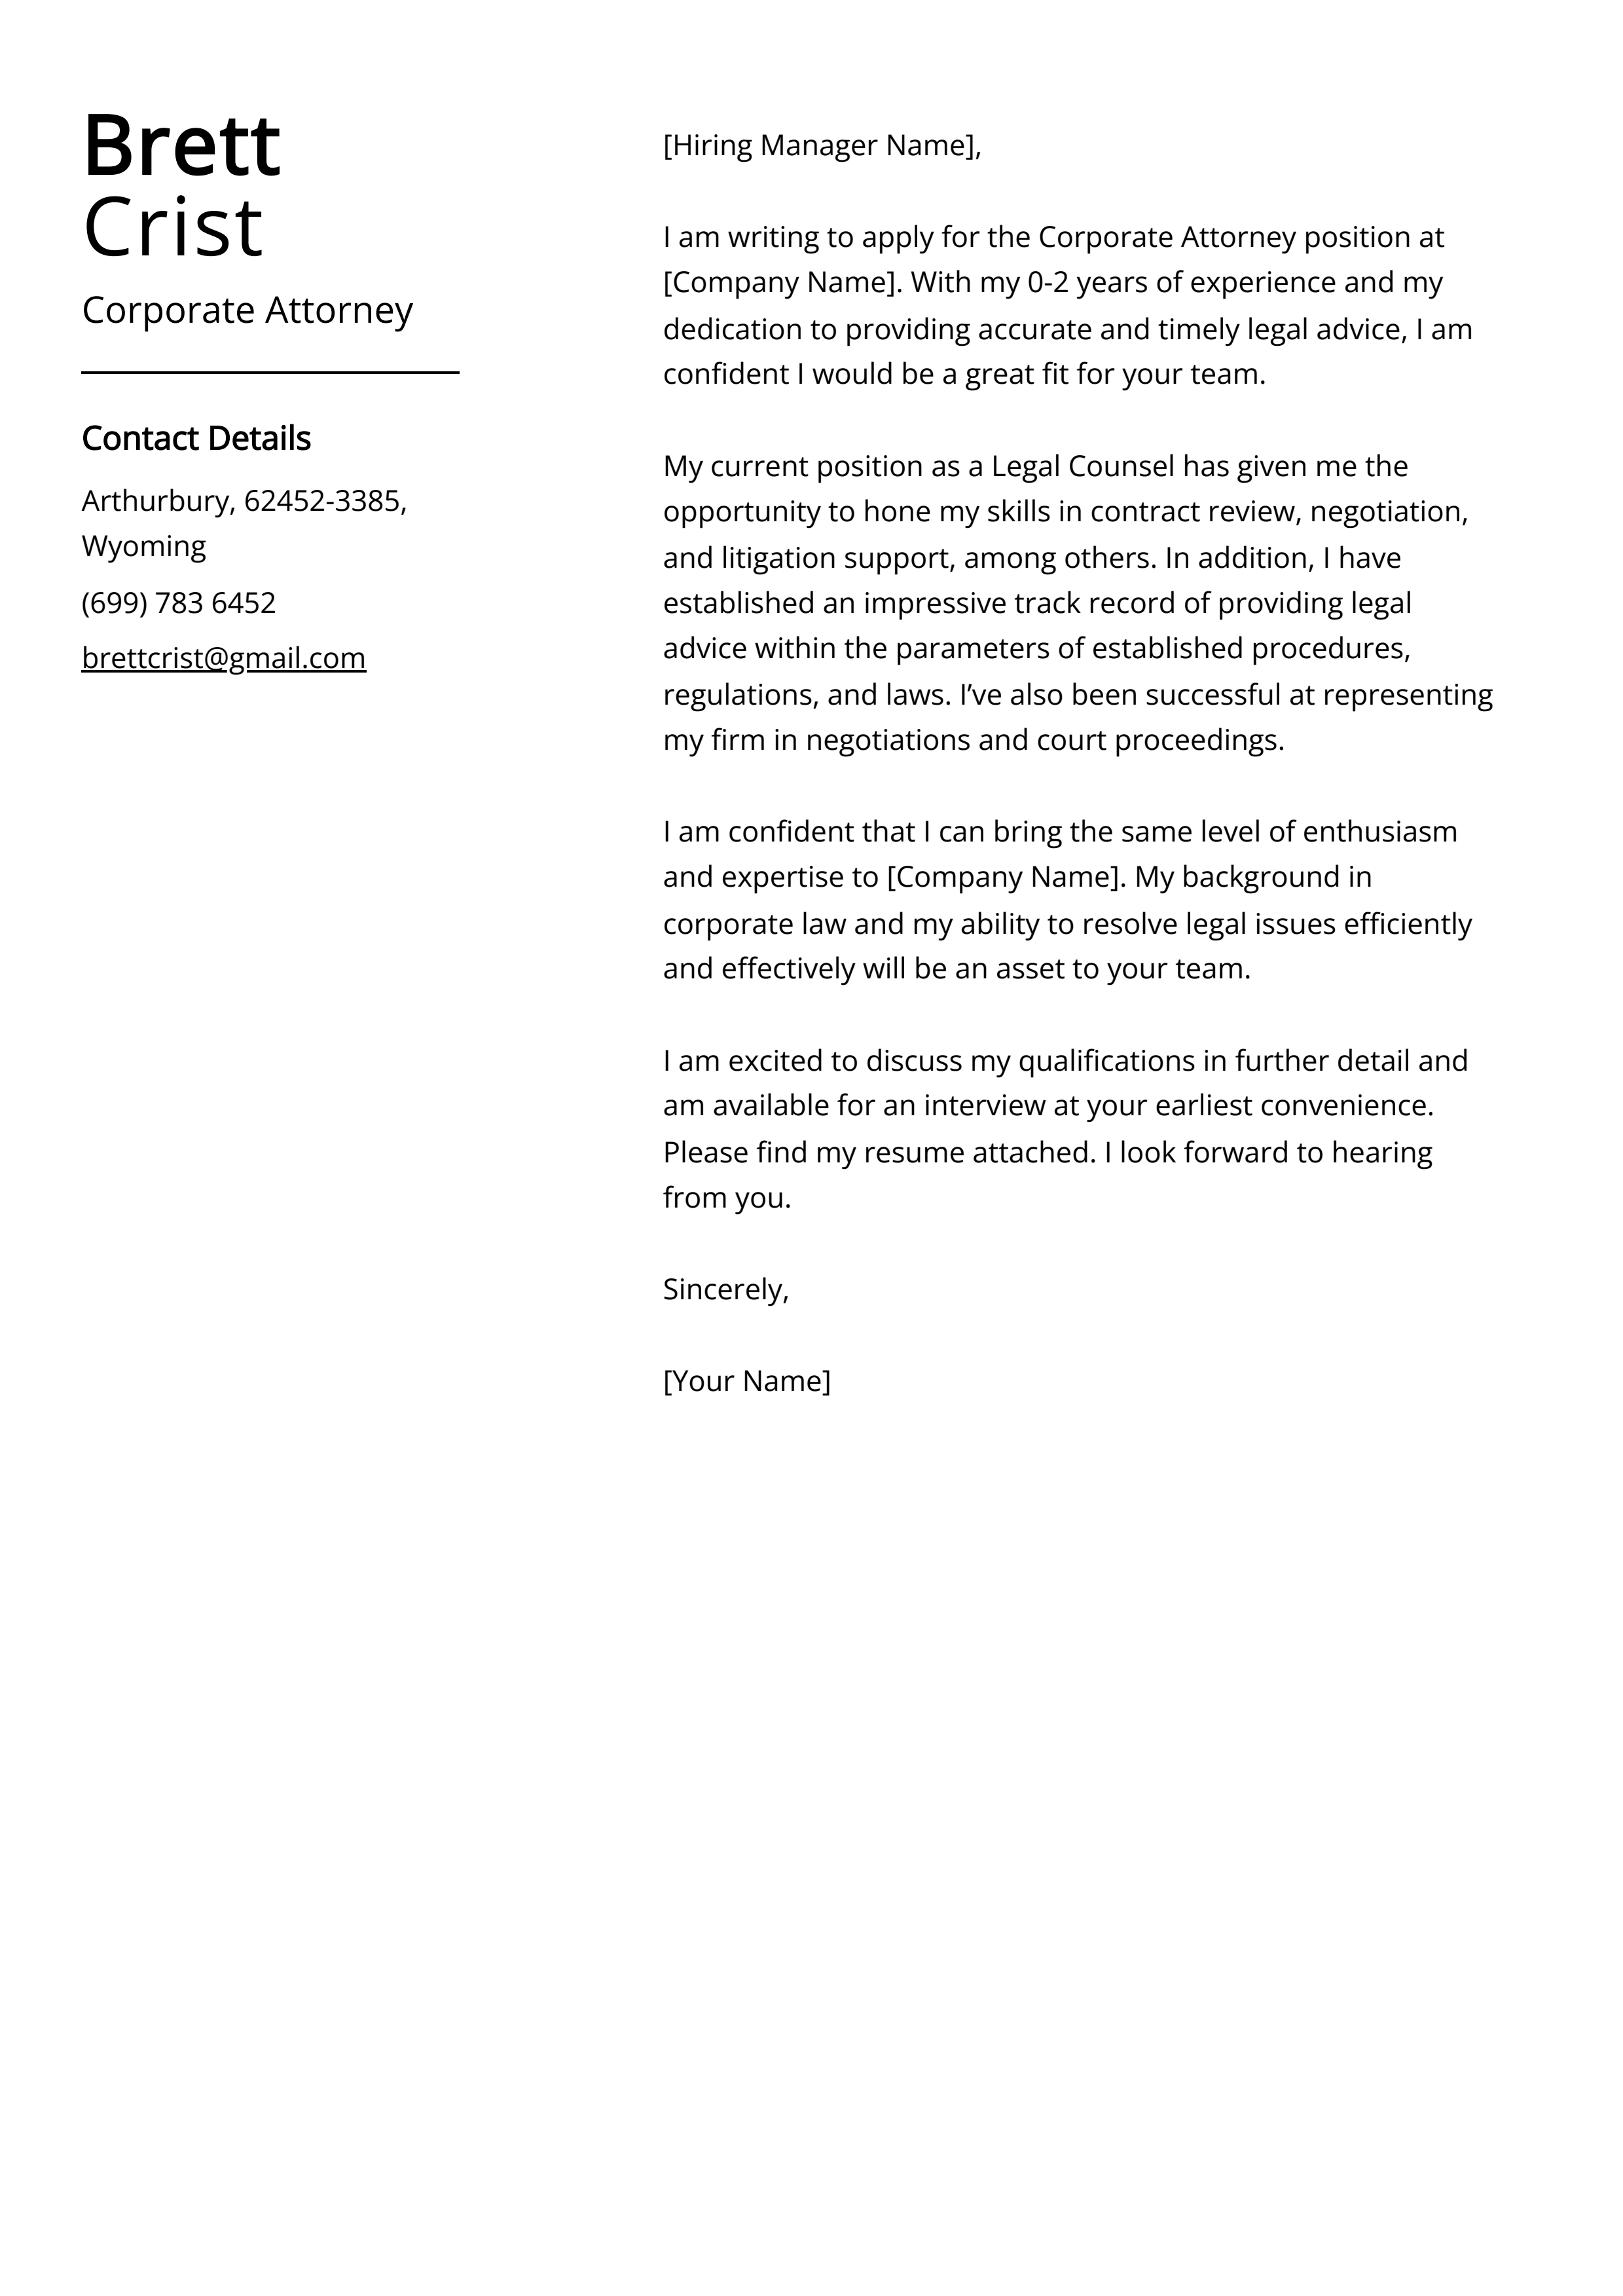 Corporate Attorney Cover Letter Example